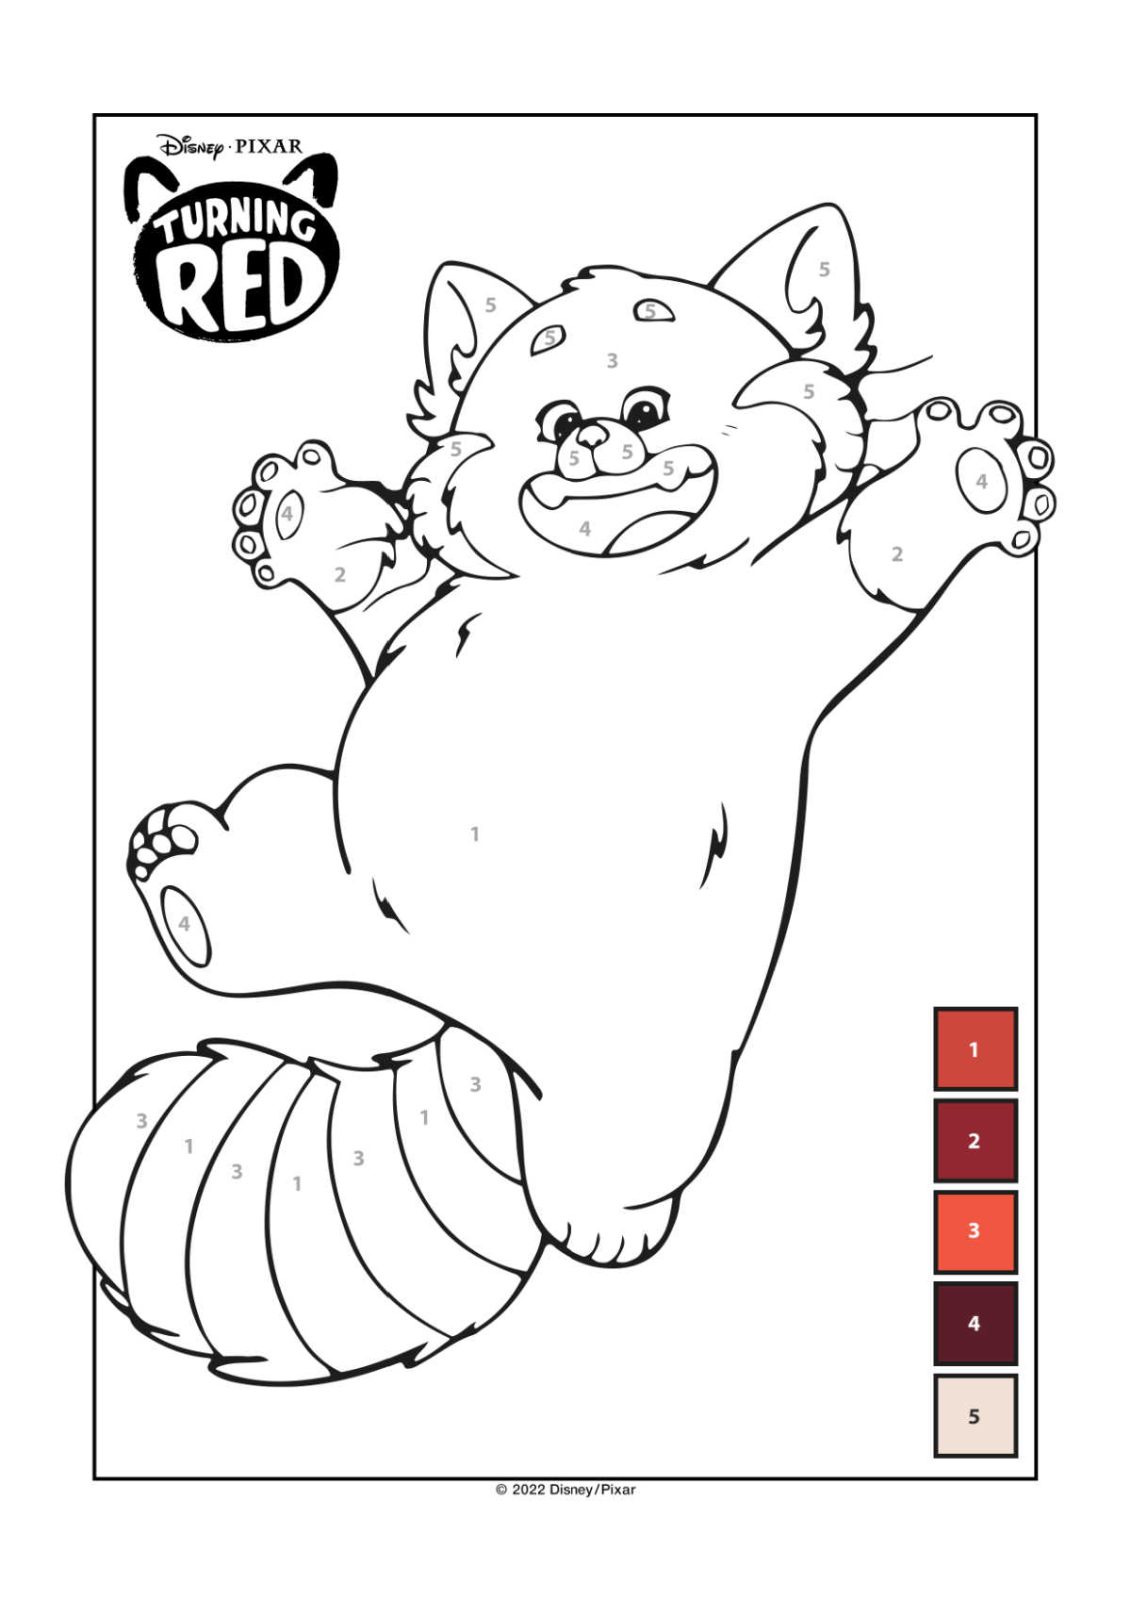 Turning Red Coloring Pages - Turning Red Coloring Pages By Number